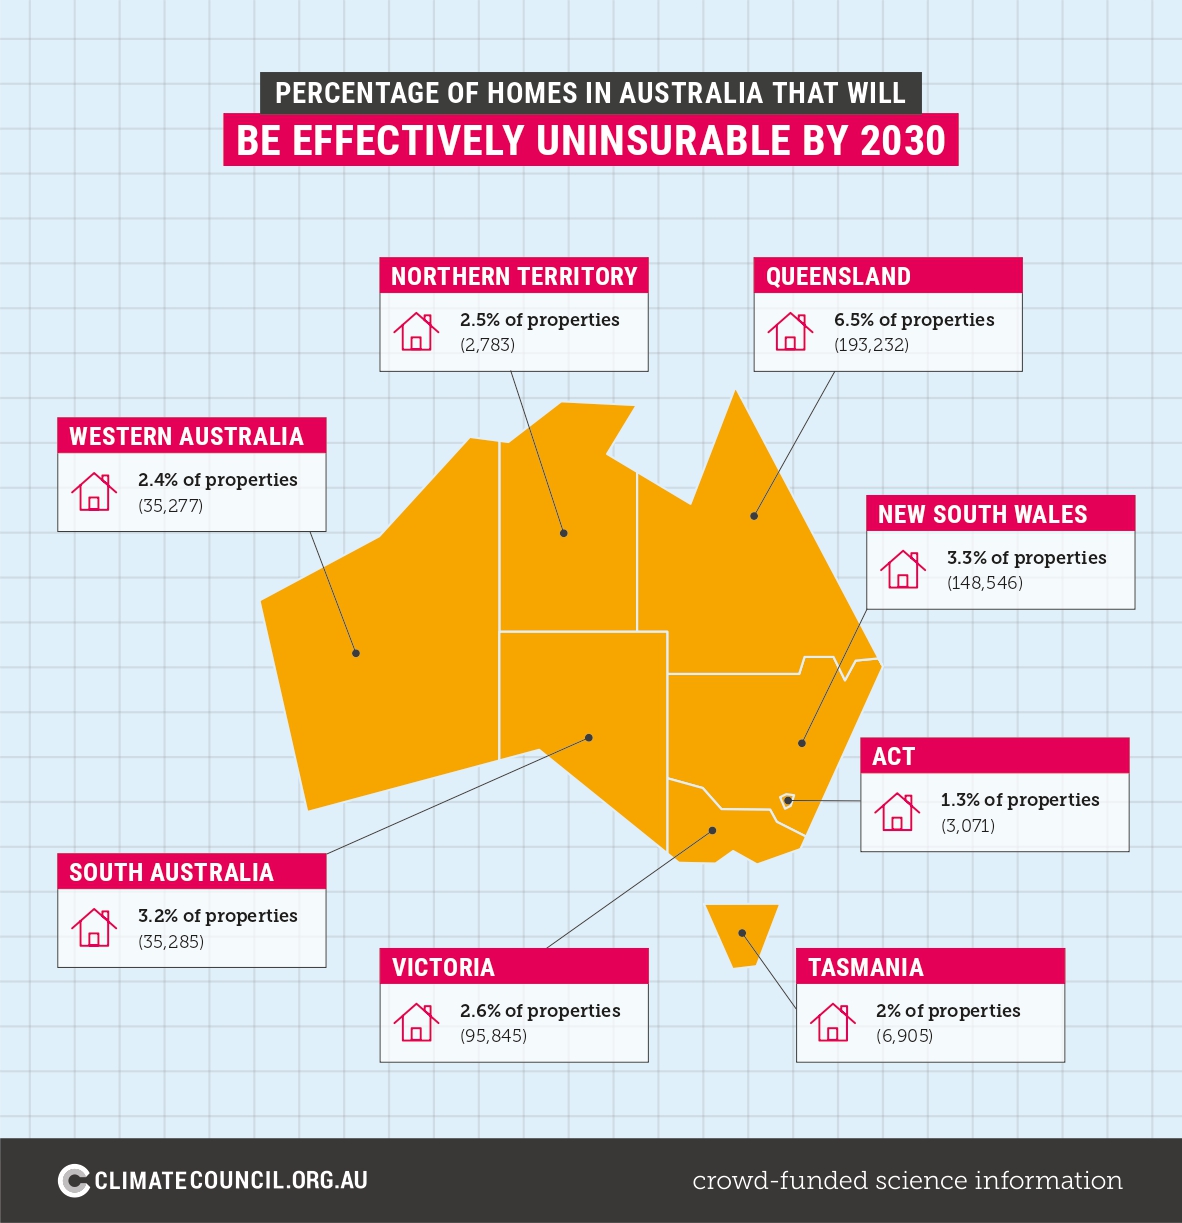 A map of Australia showing percentage of uninsurable homes.